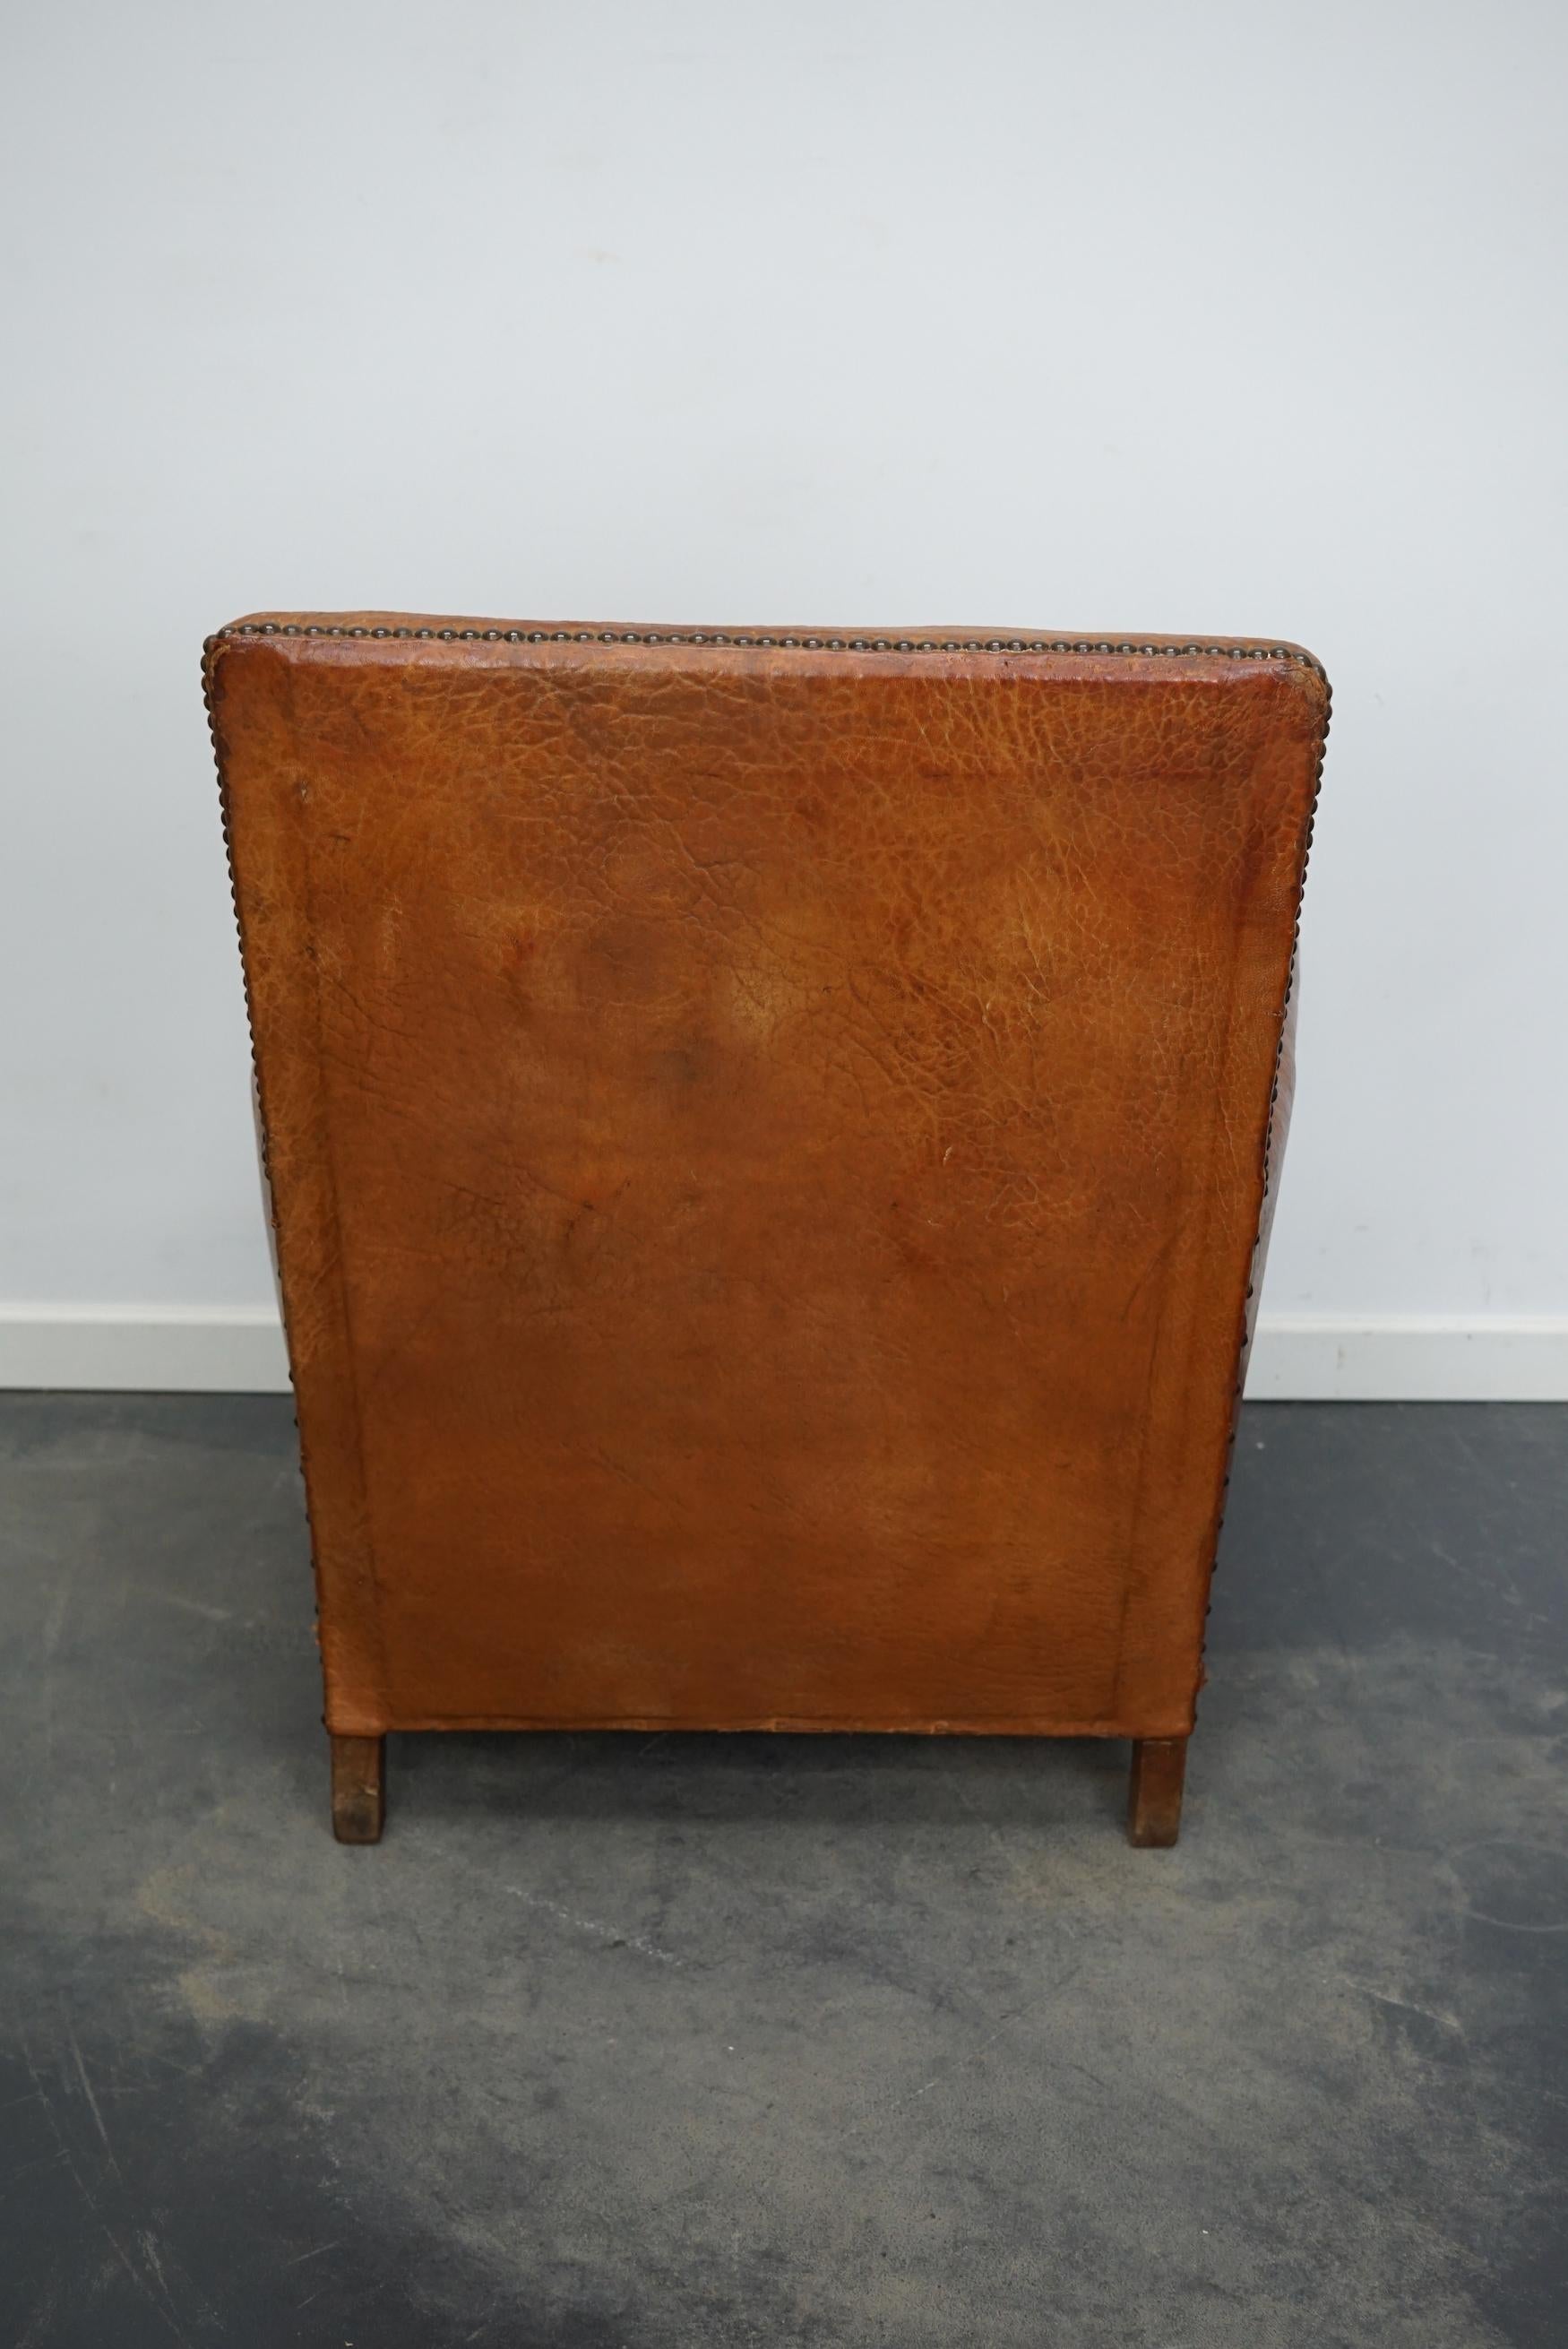 Vintage French Cognac-Colored Leather Club Chair, 1940s For Sale 5